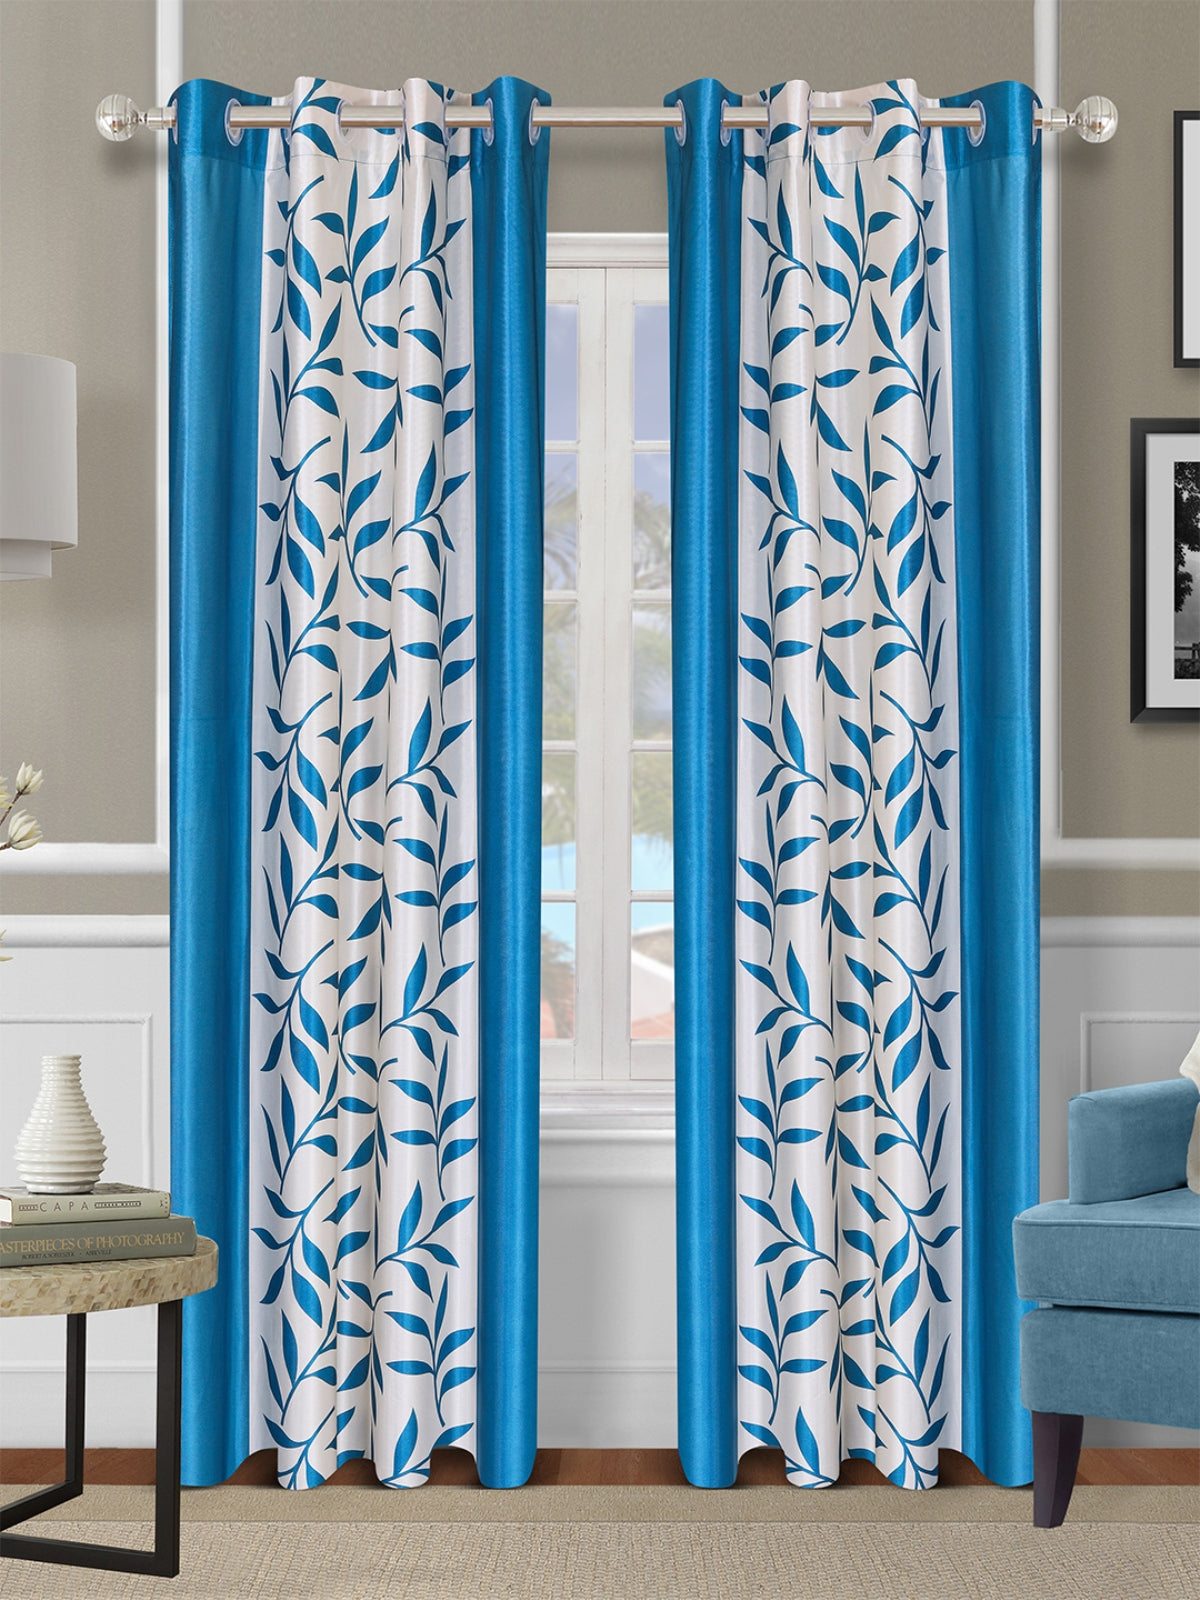 Romee Blue & White Leafy Patterned Set of 2 Door Curtains